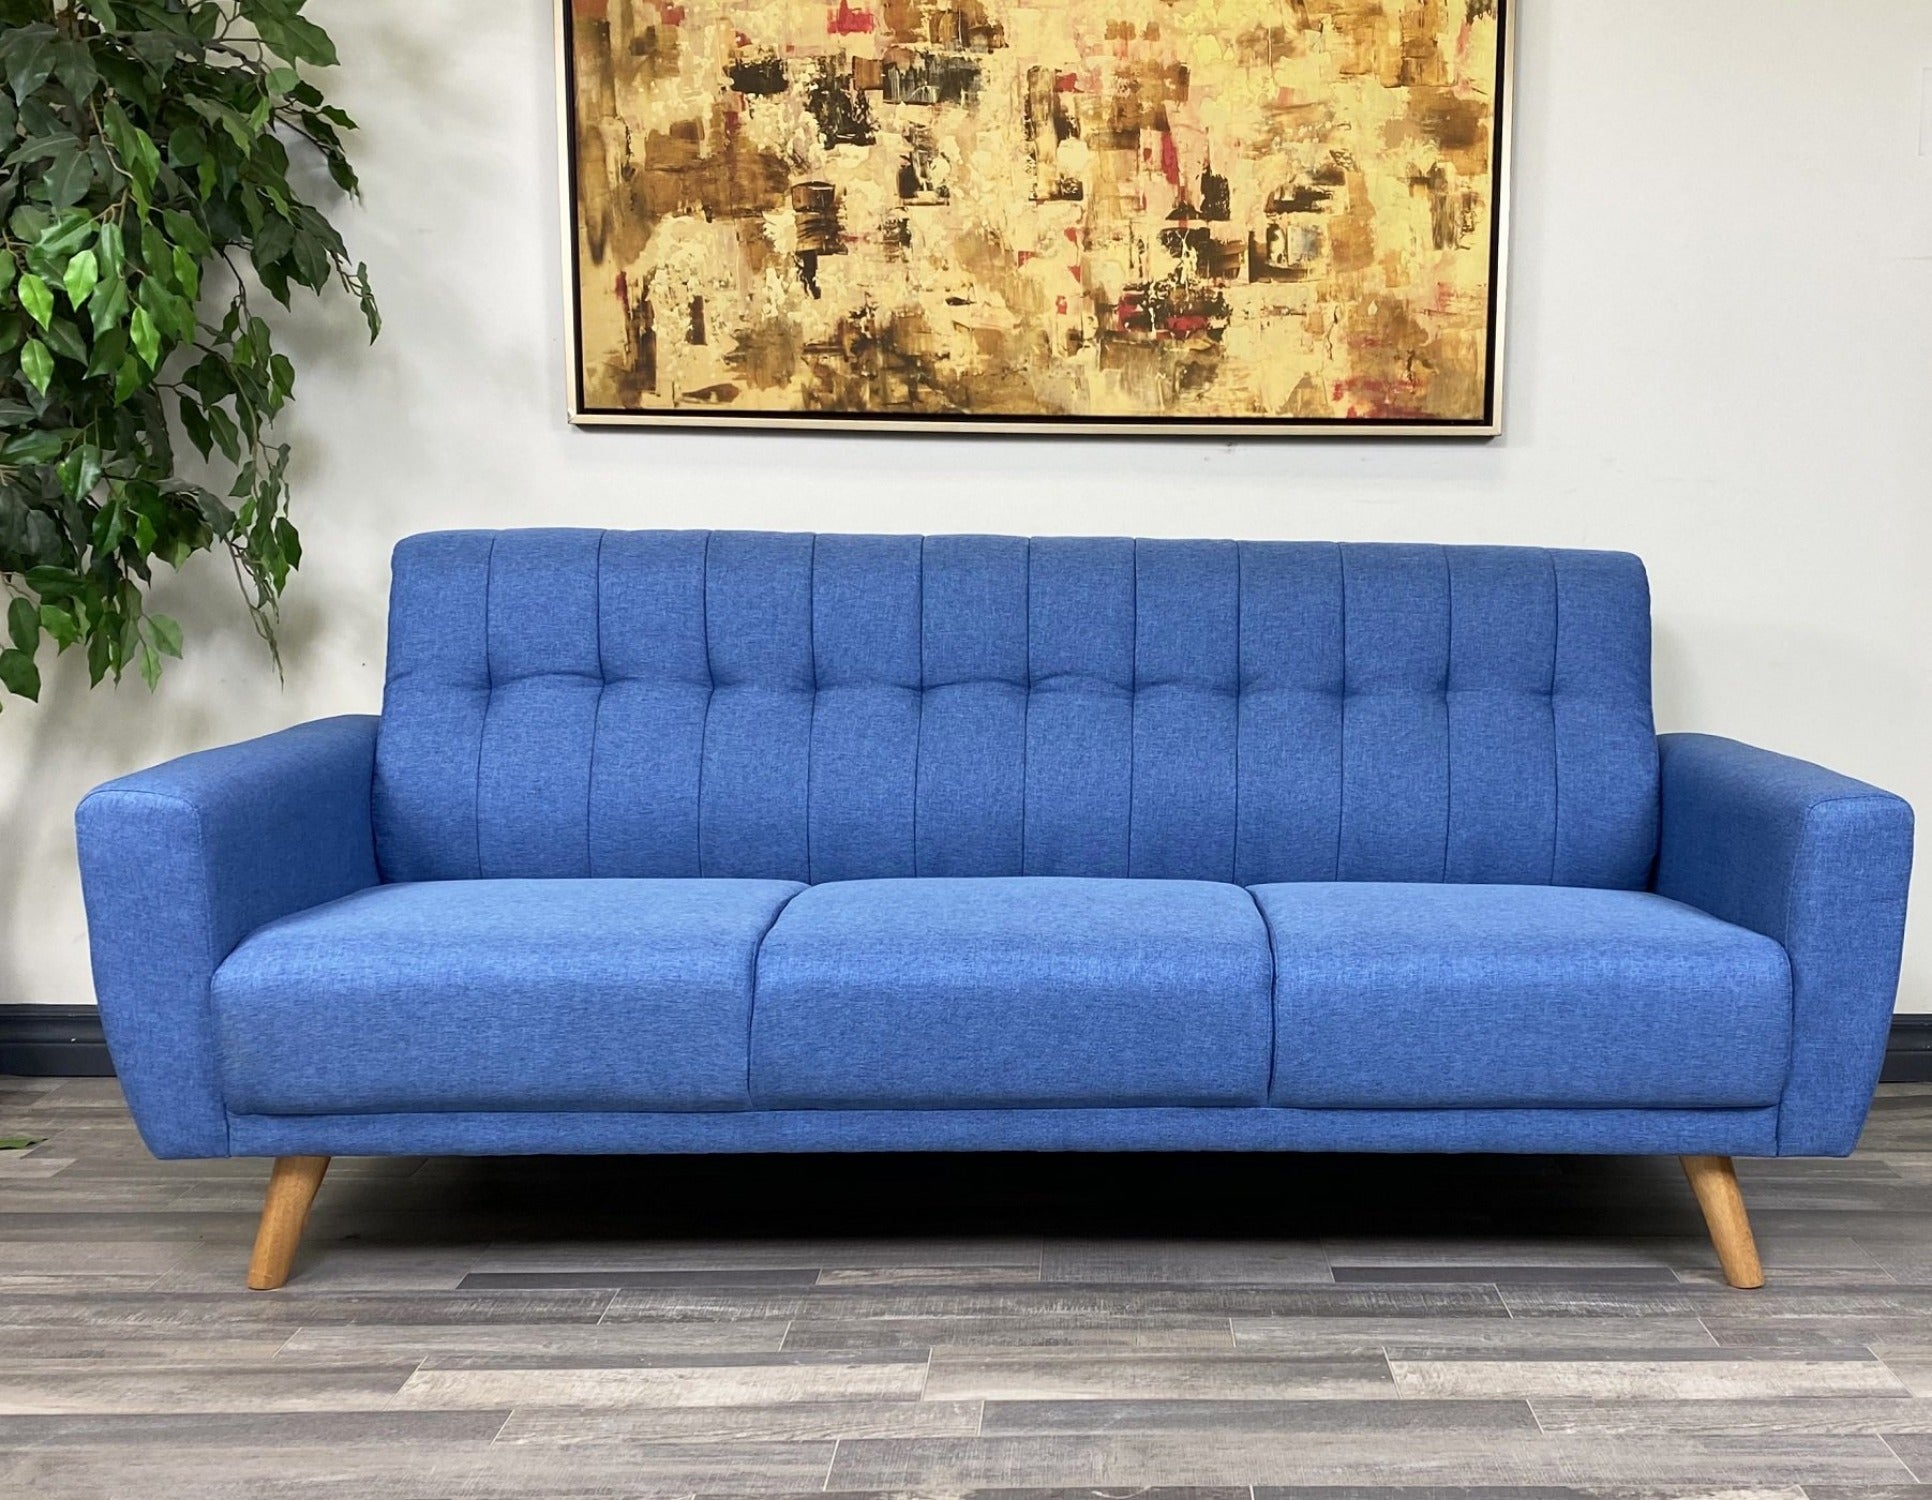 ViscoLogic MOCA Contemporary New Mid-Century Tufted Style Fabric Upholstered Modern Living Room Sofa (Arm Chair- Blue)